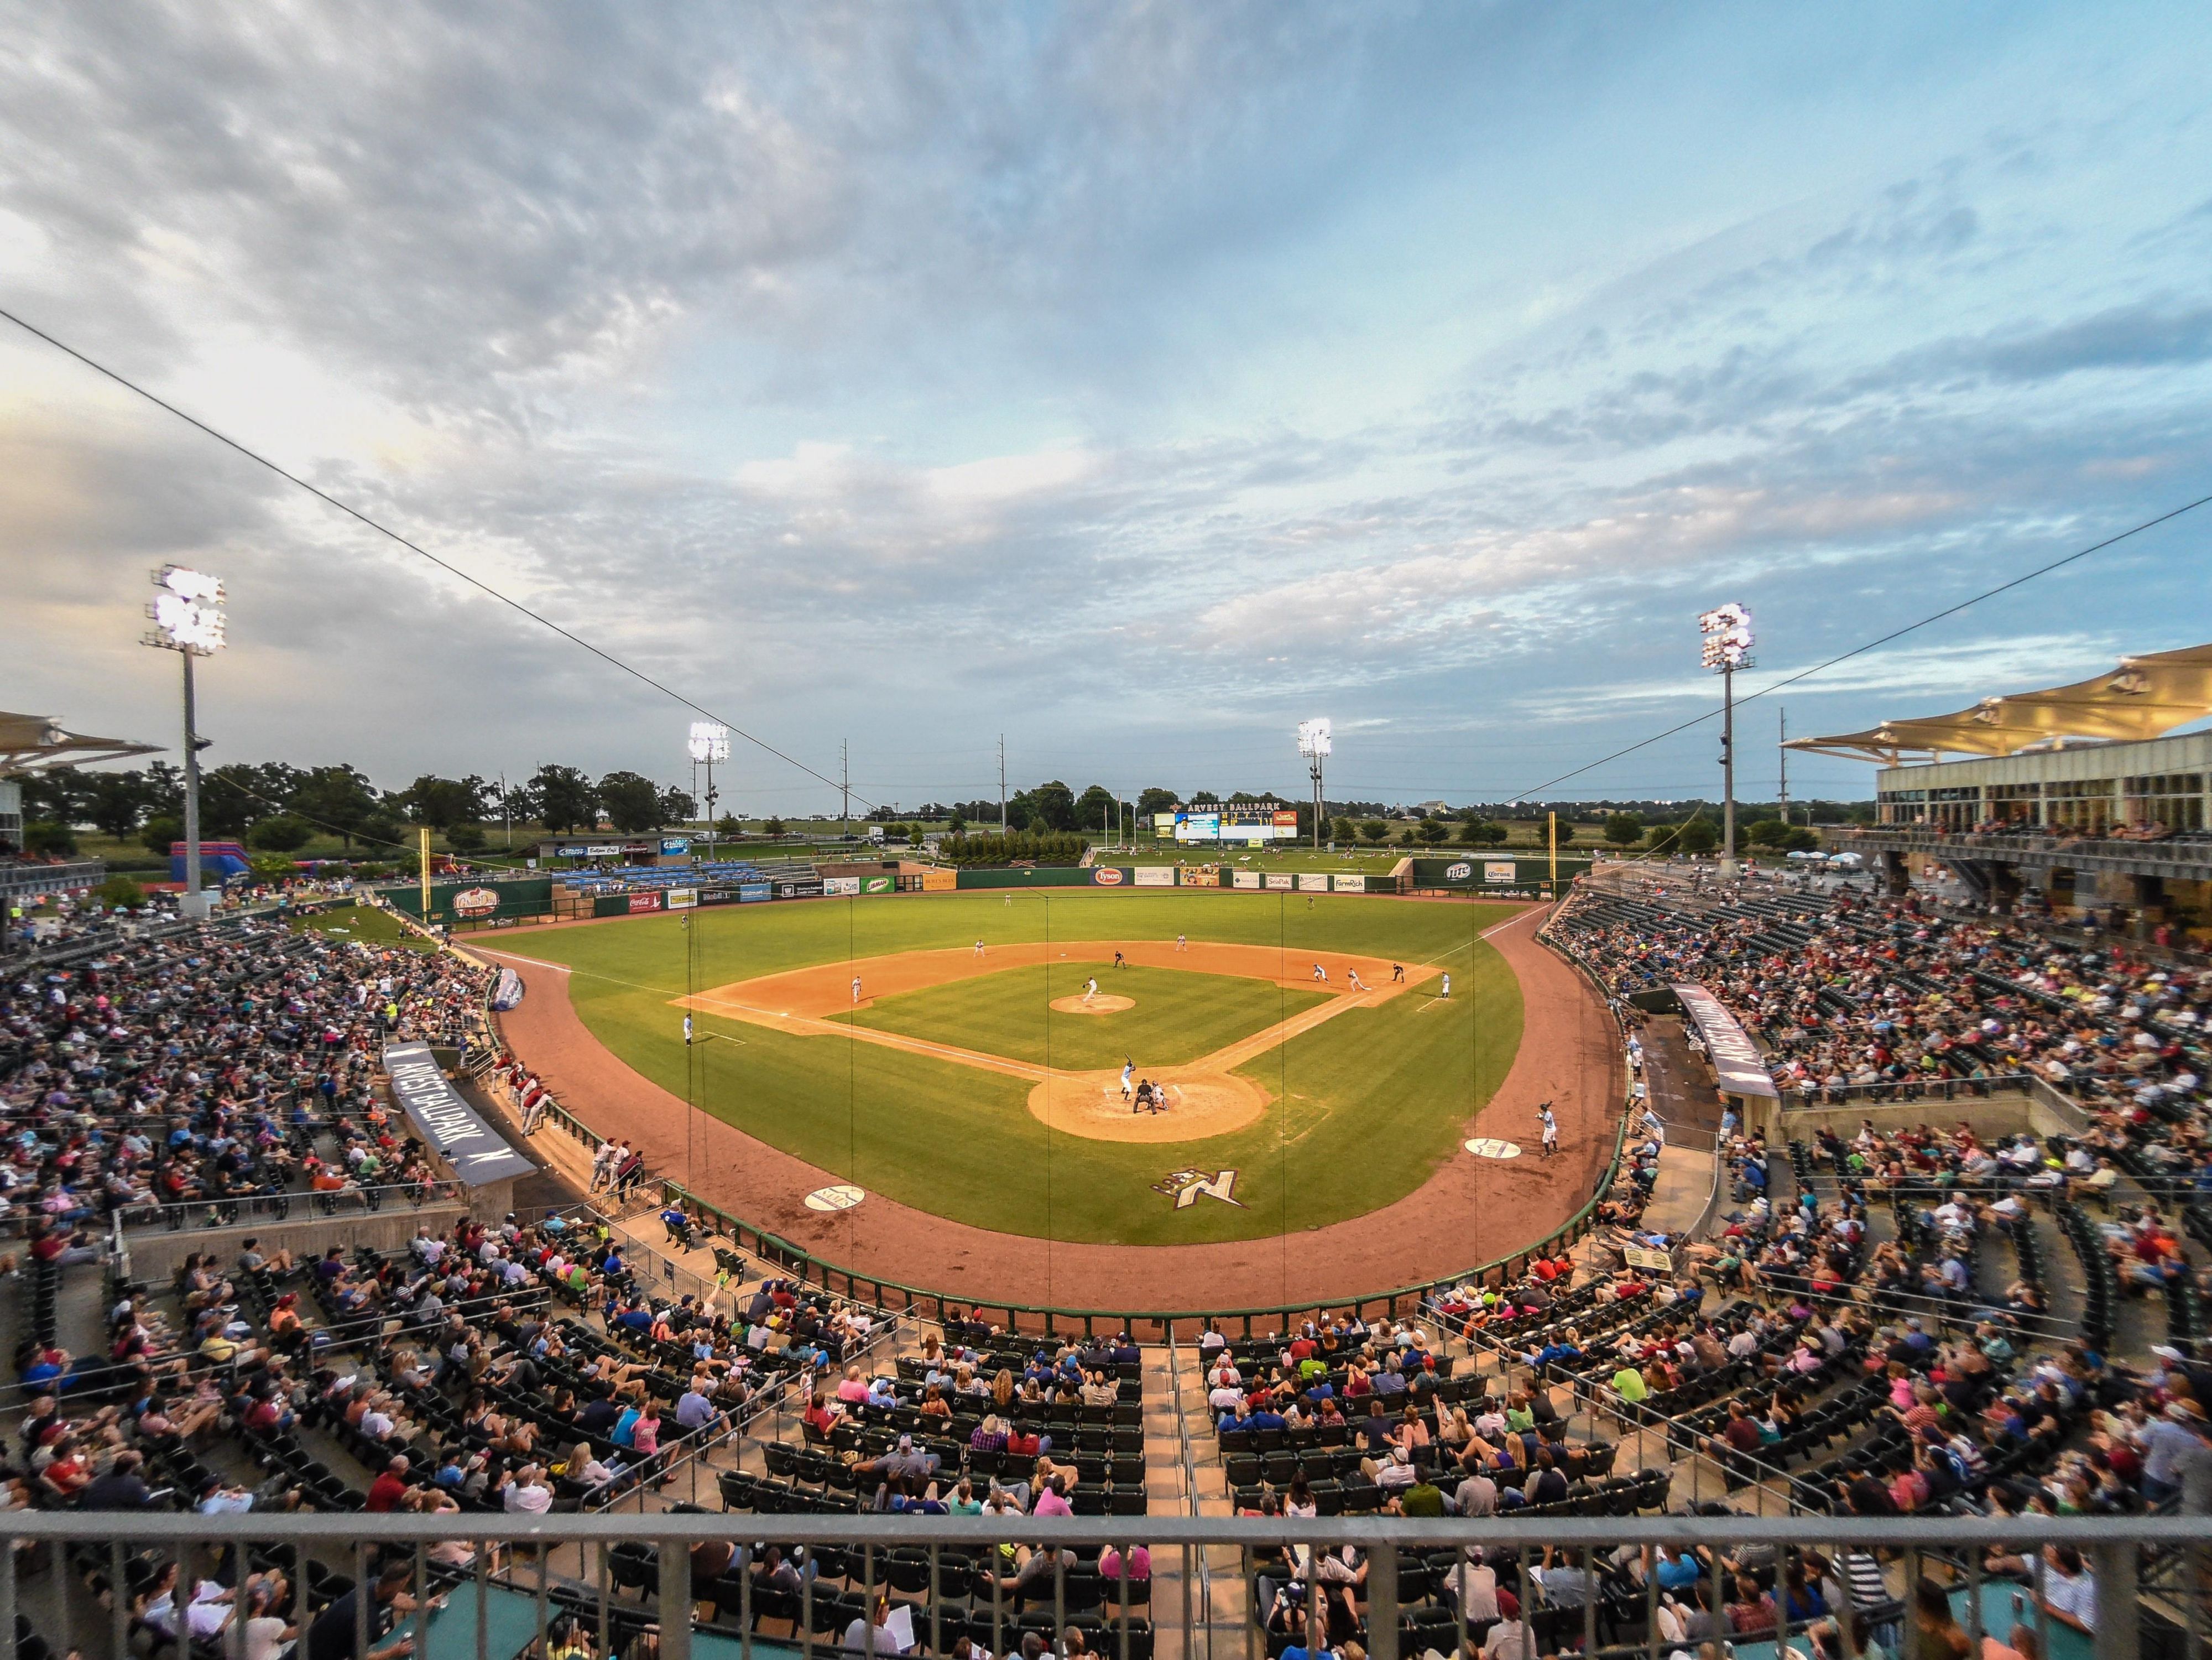 You can catch a NWA Naturals (Double A affiliate of the Kansas City Royals) baseball game at Arvest Ballpark, a mere 1.4 miles from the hotel.